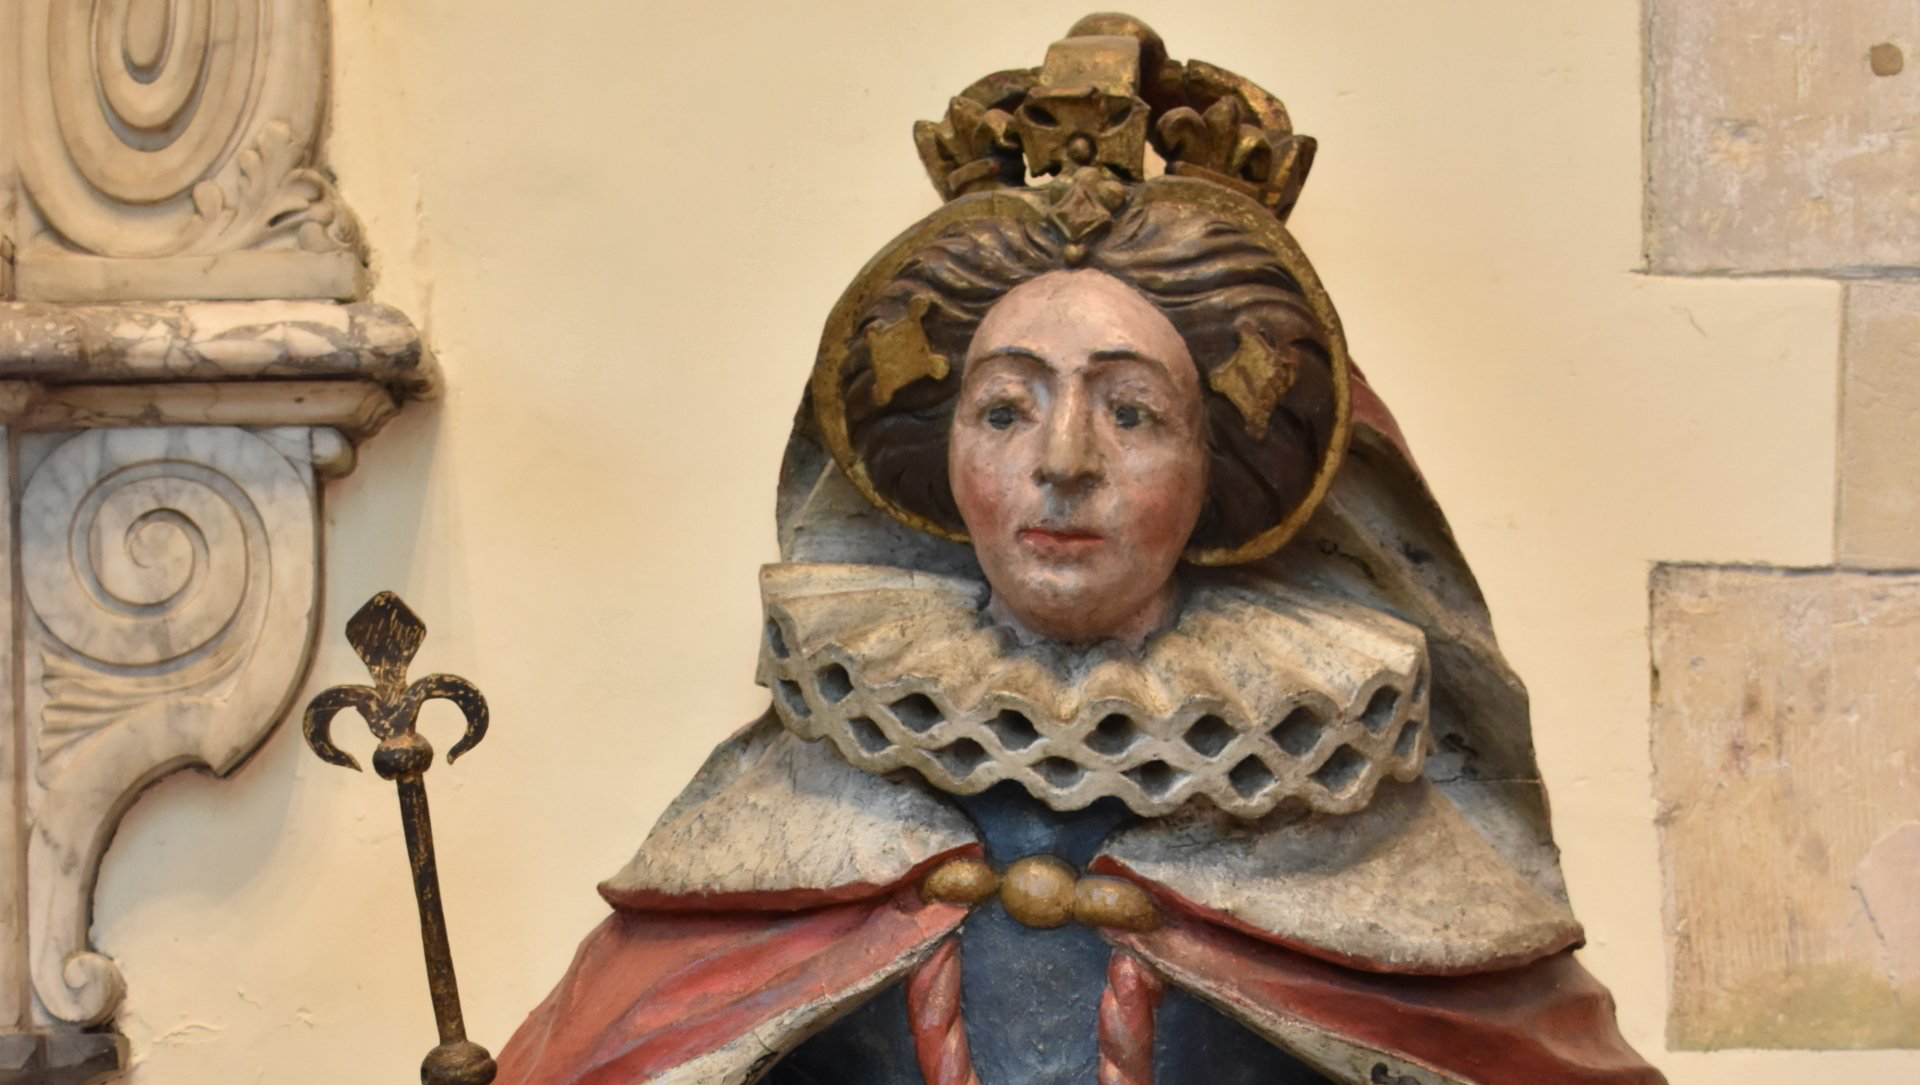 A photograph of a statue of Queen Elizabeth I in St Mary Redcliffe Church, Bristol, England